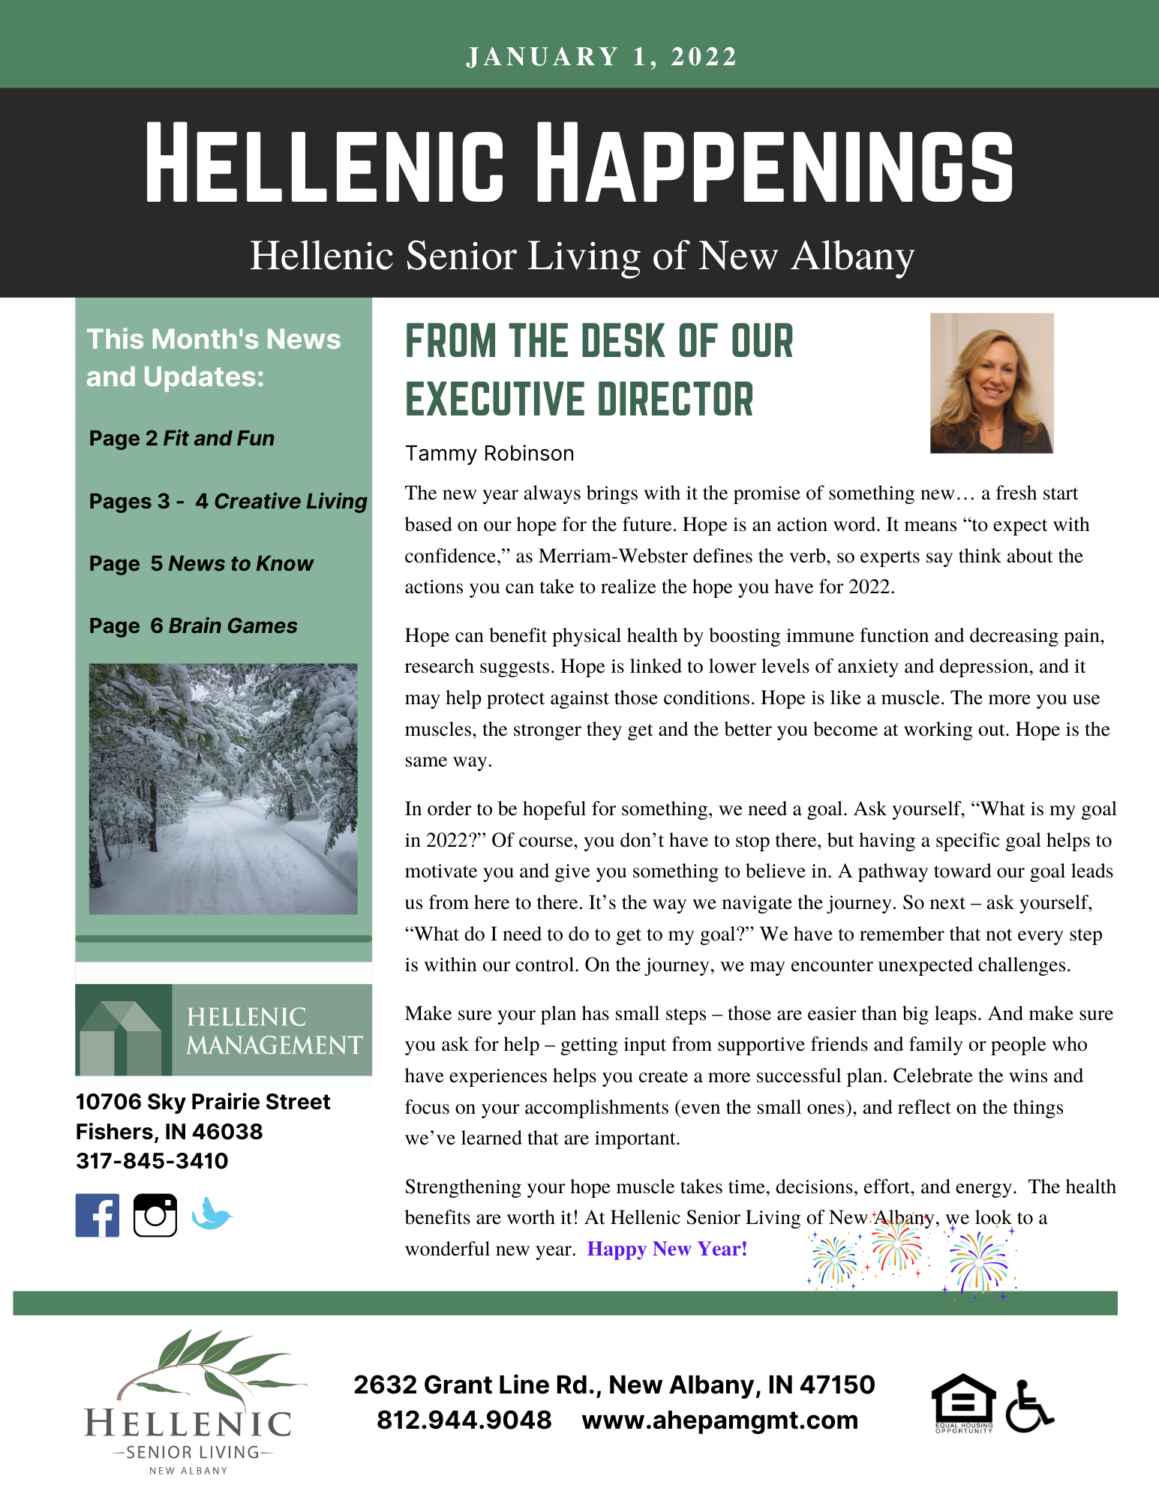 Hellenic Happenings January Newsletter, page 1